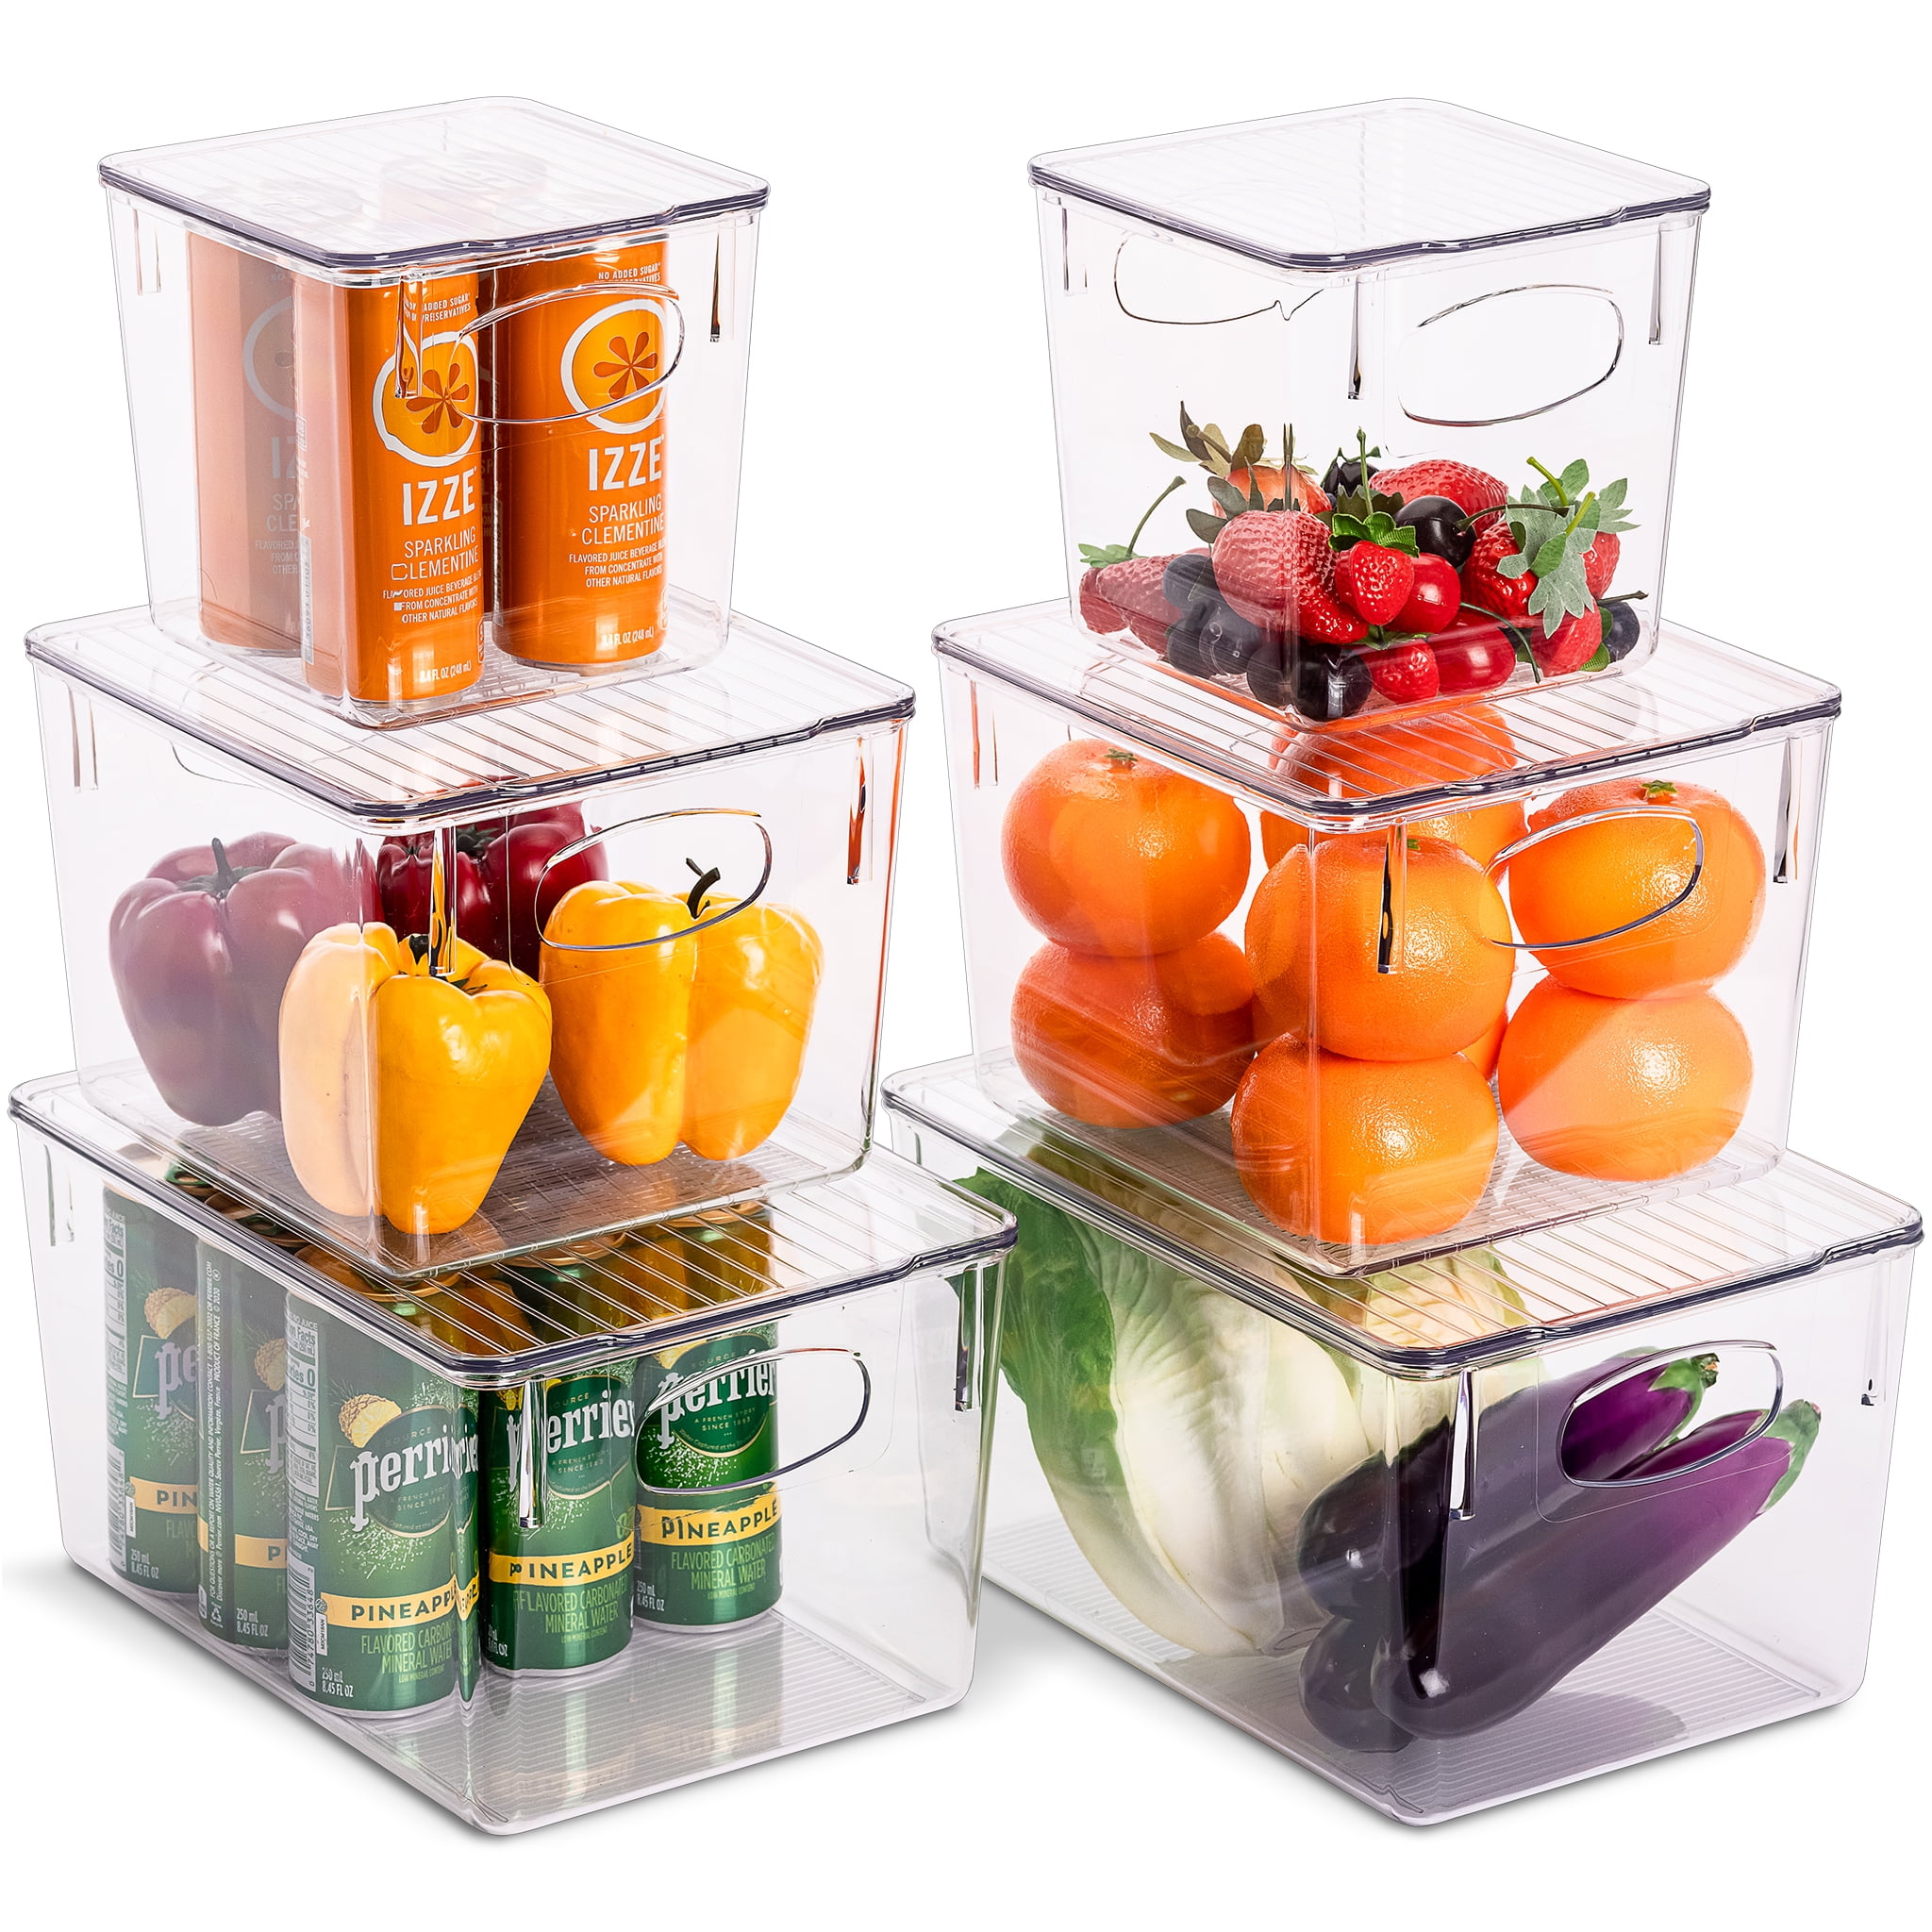 Bhome - 2 Adjustable Snack Organizer Bins for Cabinet & Pantry Organization and Storage Plastic Storage Bins for Kitchen Organization - Clear